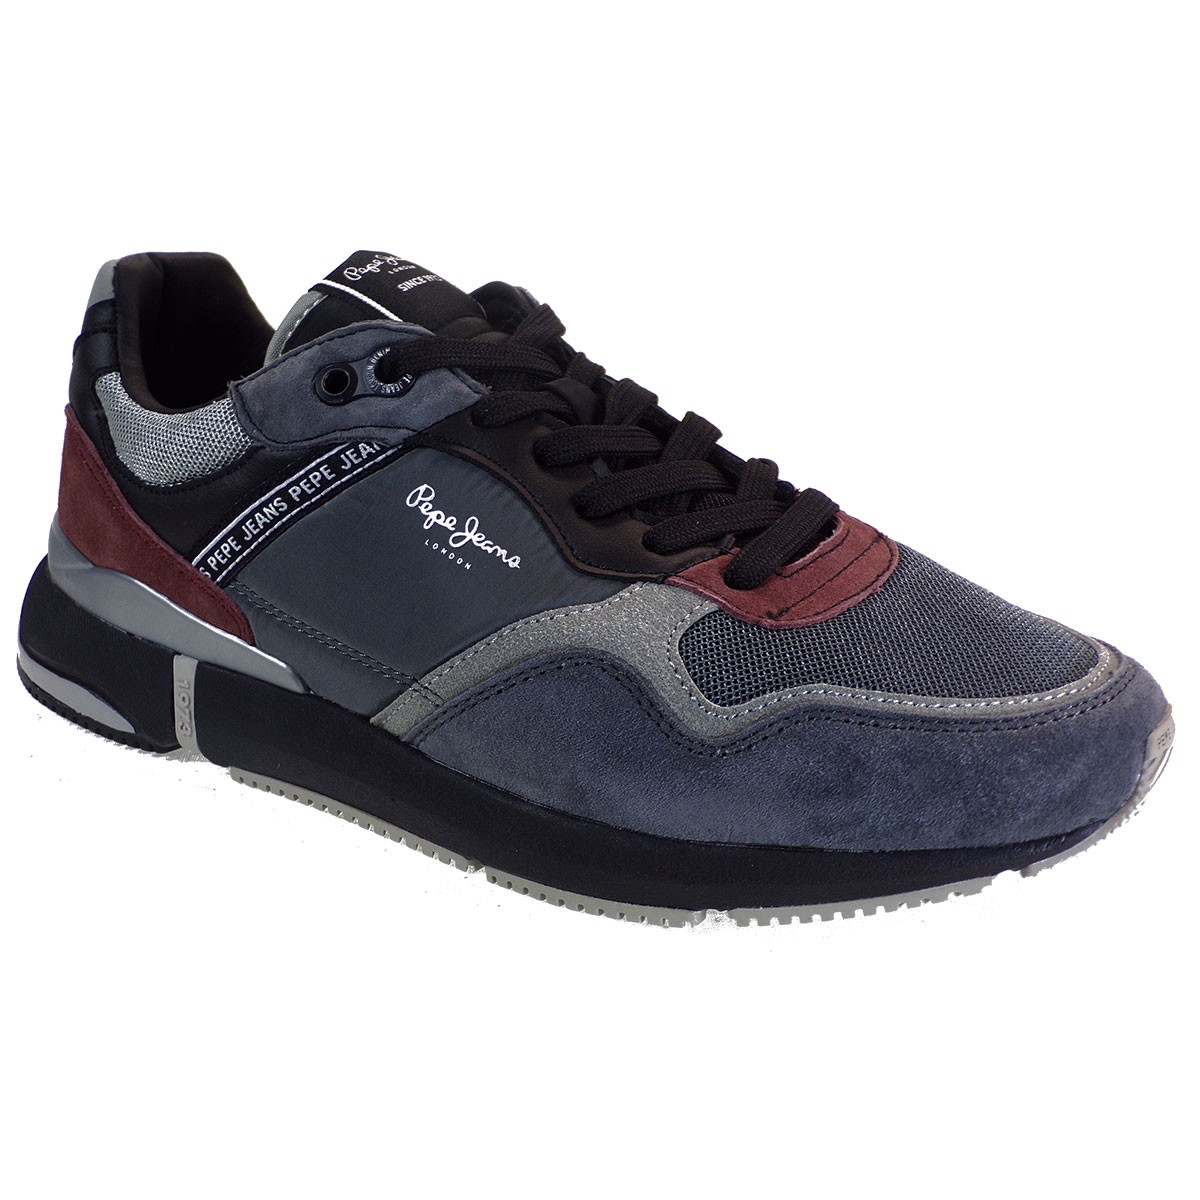 Pepe Jeans LONDON PRO Sneakers Ανδρικά Παπούτσια PMS30863-982 Ανθρακί